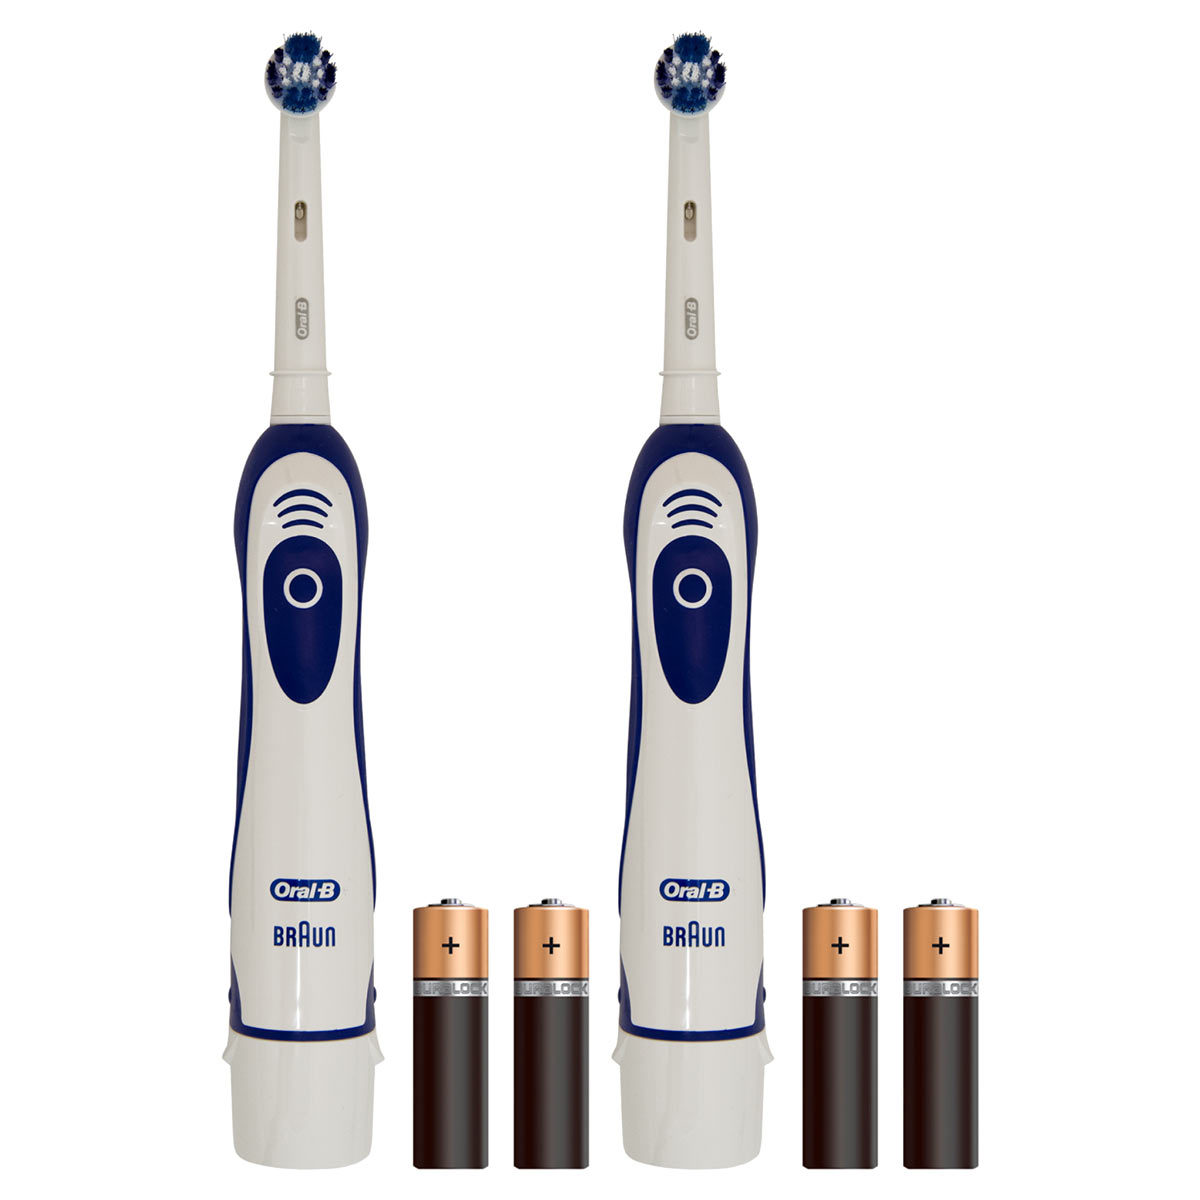 Oral-B Pro Expert 400 Battery Toothbrush, 2 Pack